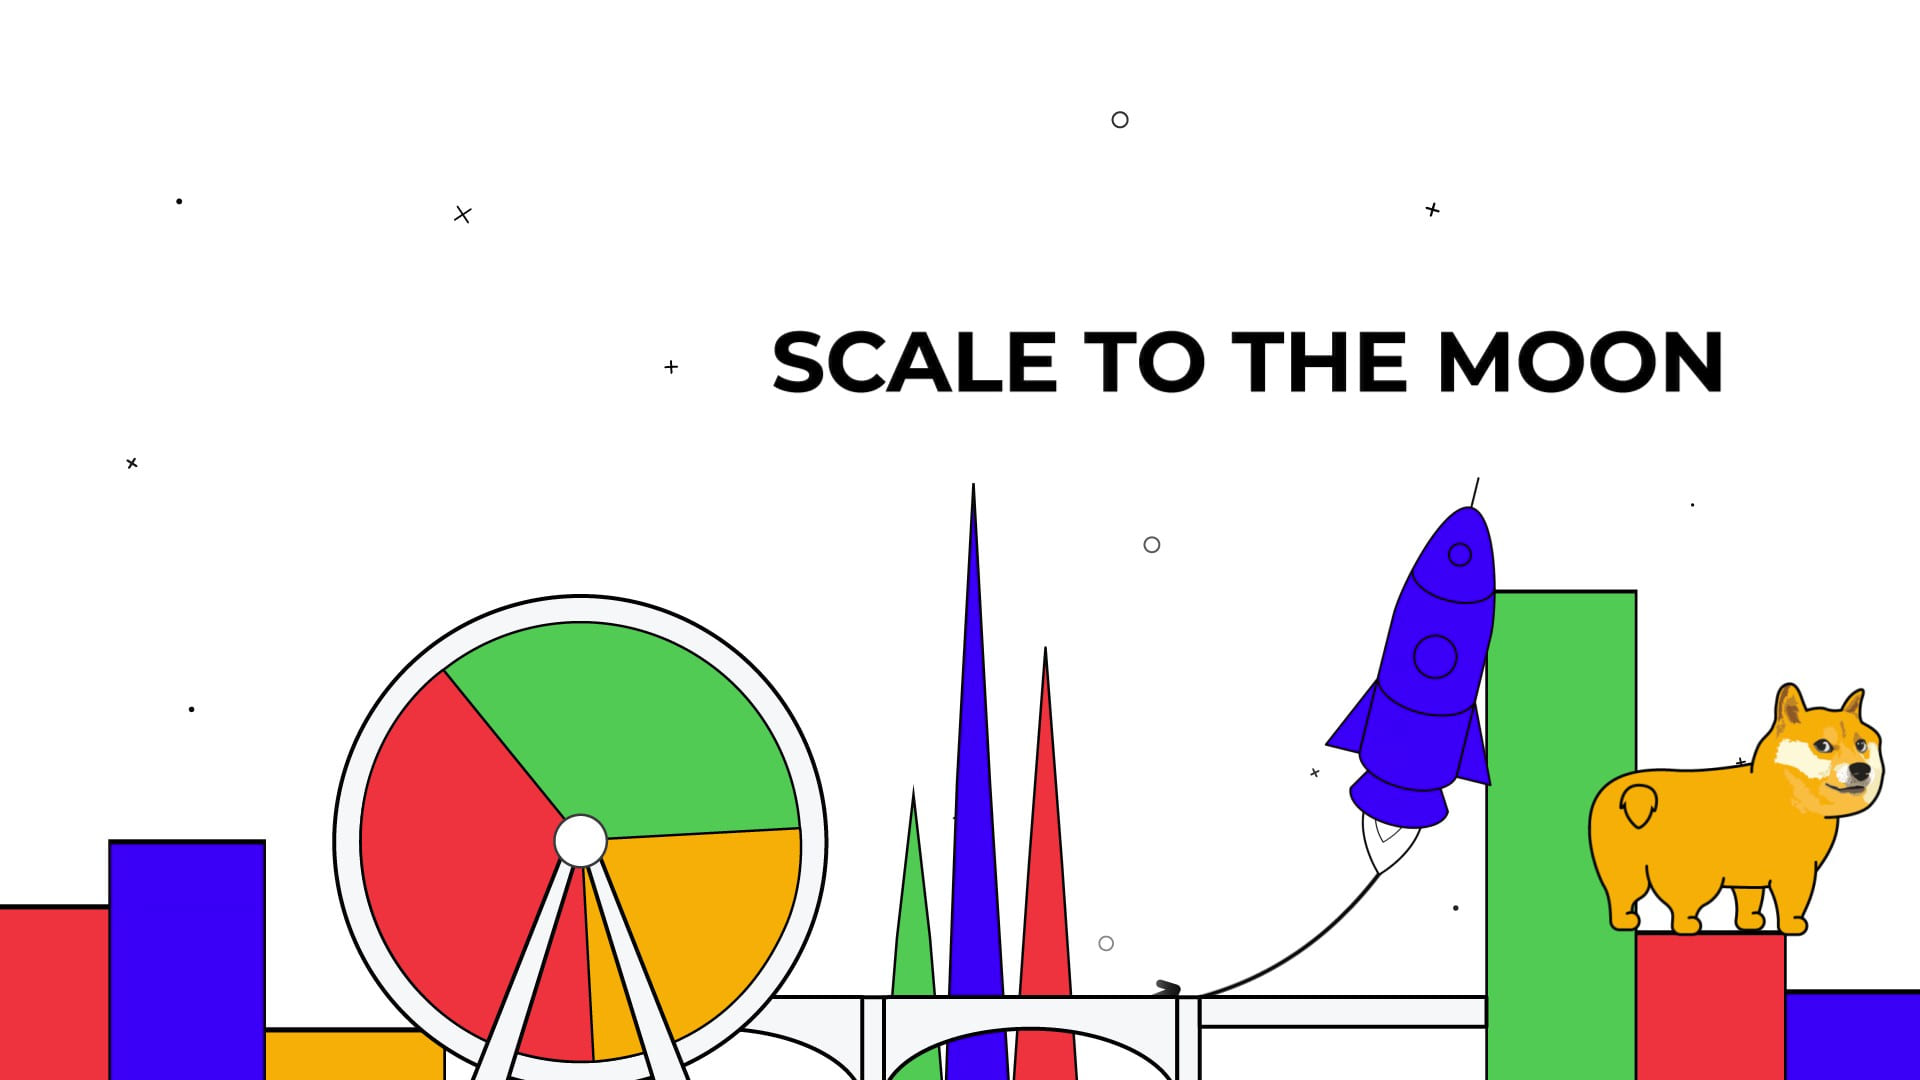 Promo Video for RichAds LTD scale to the moon